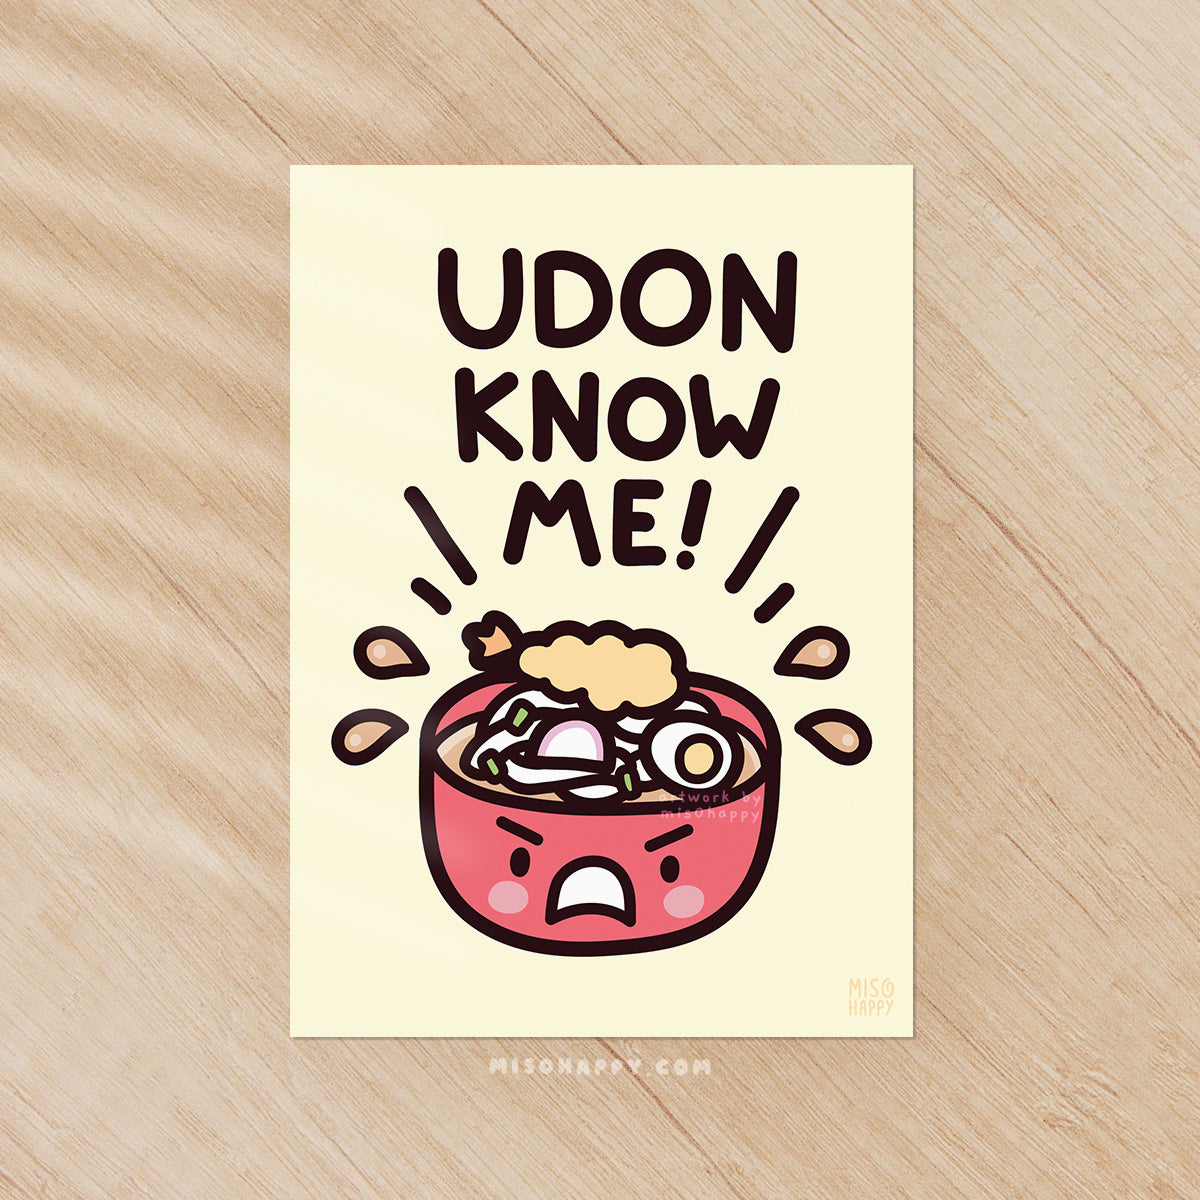 "Udon Know Me!" Print